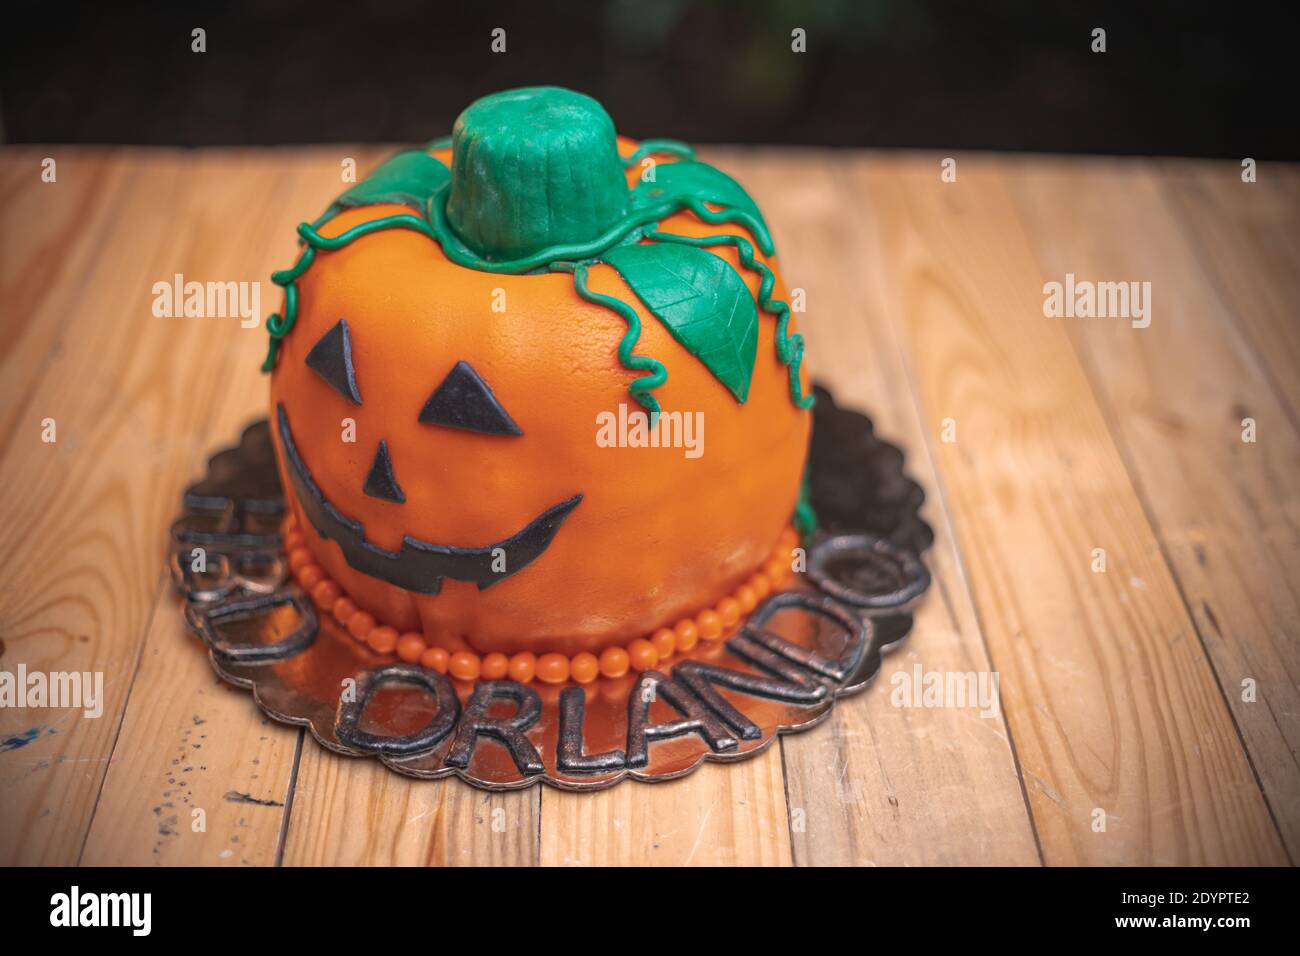 A delicious pumpkin shaped cake on a wooden table Stock Photo